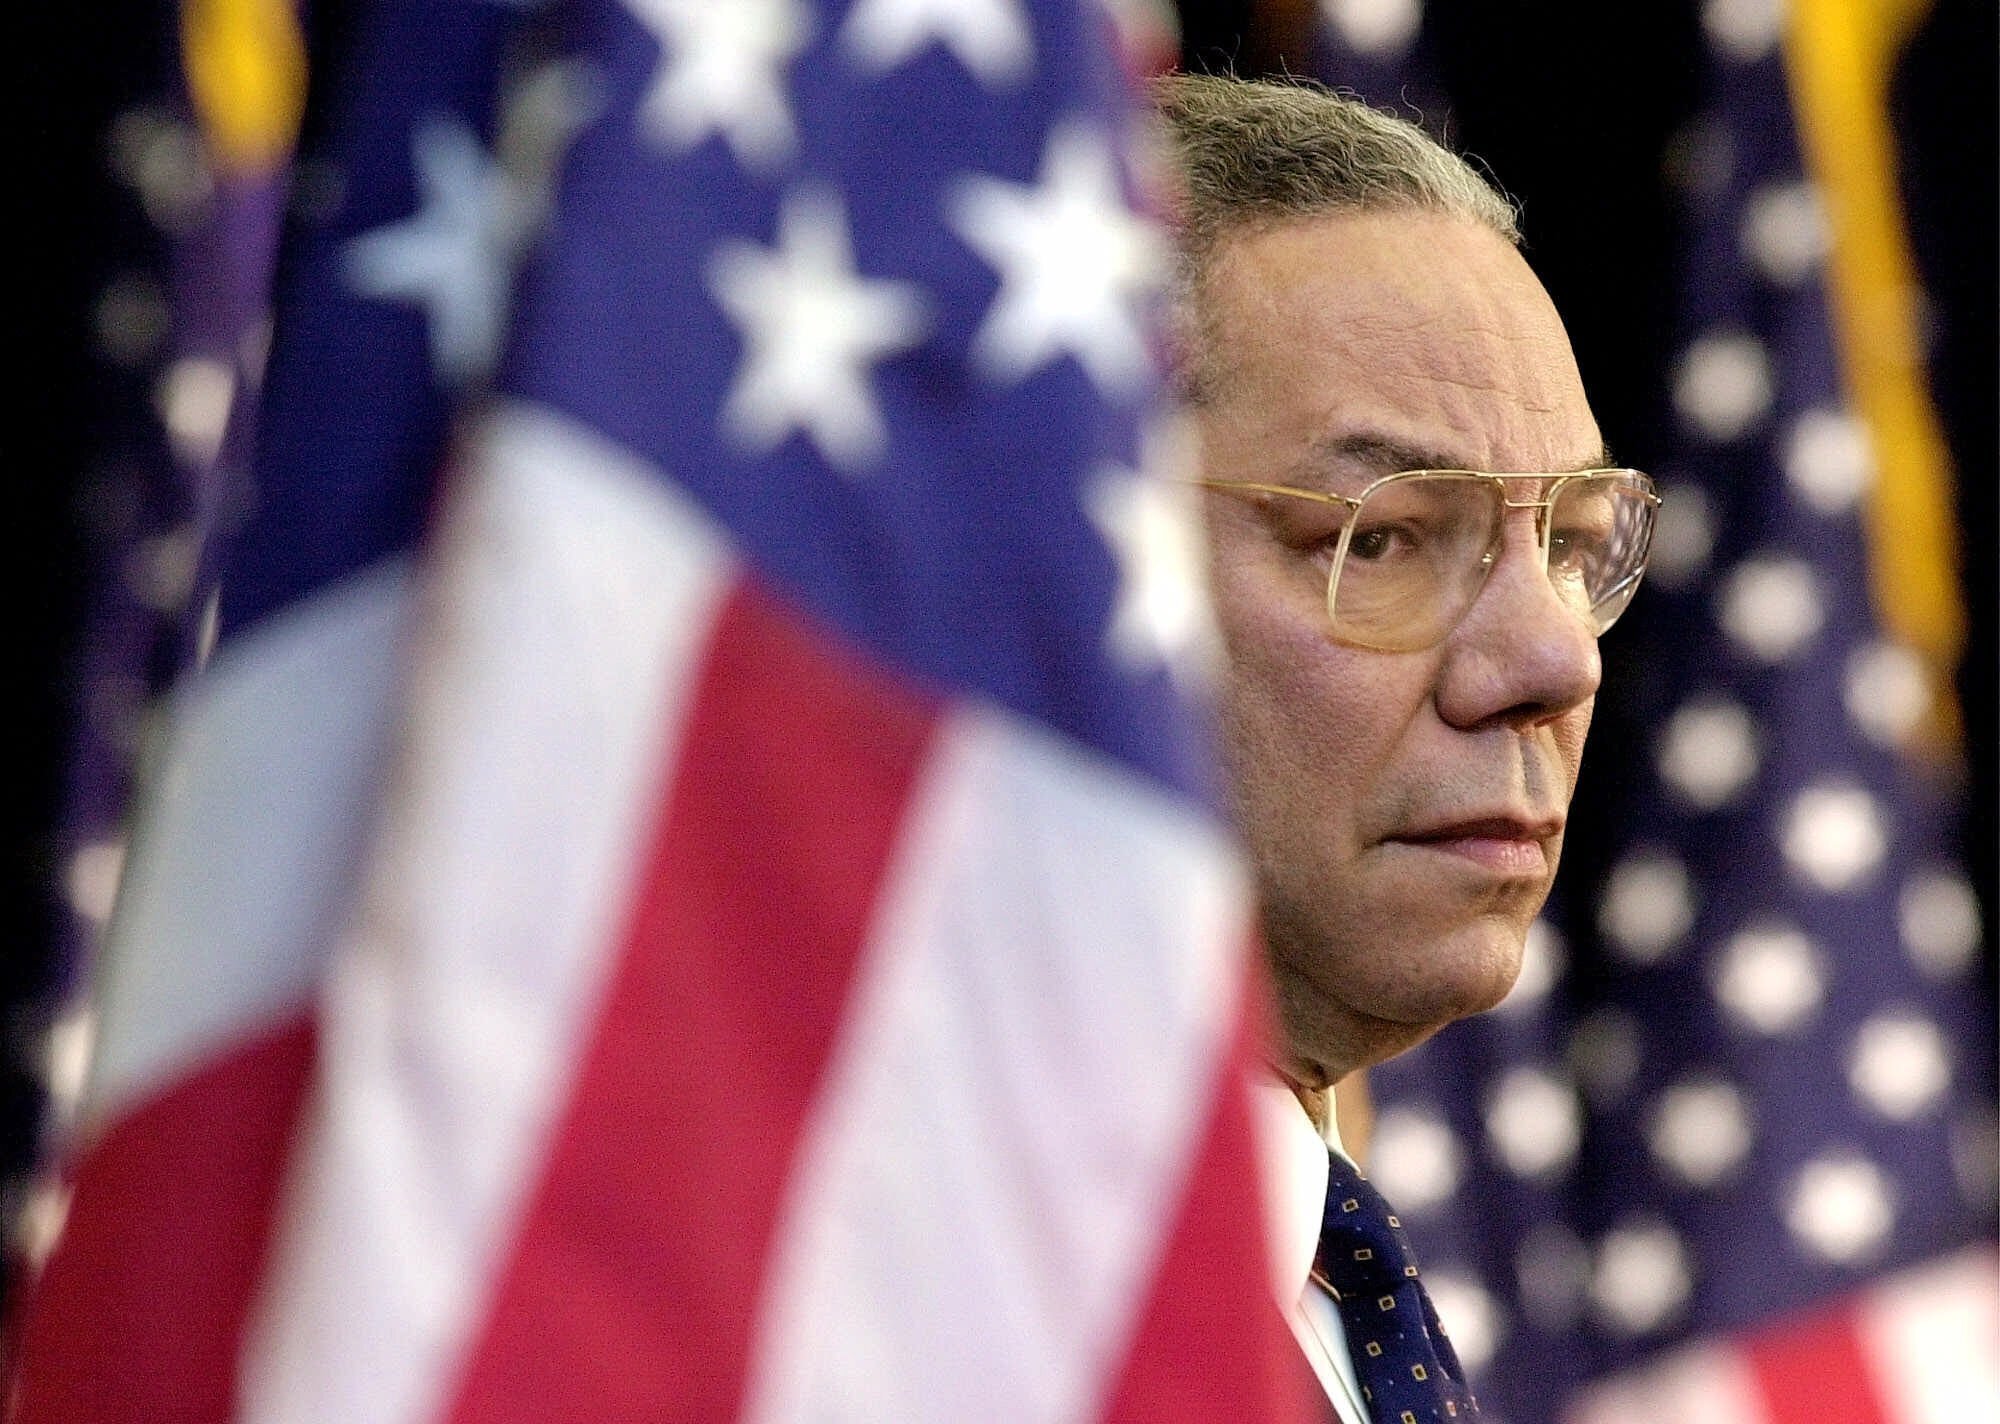 Colin Powell the First Black US Secretary of State Died